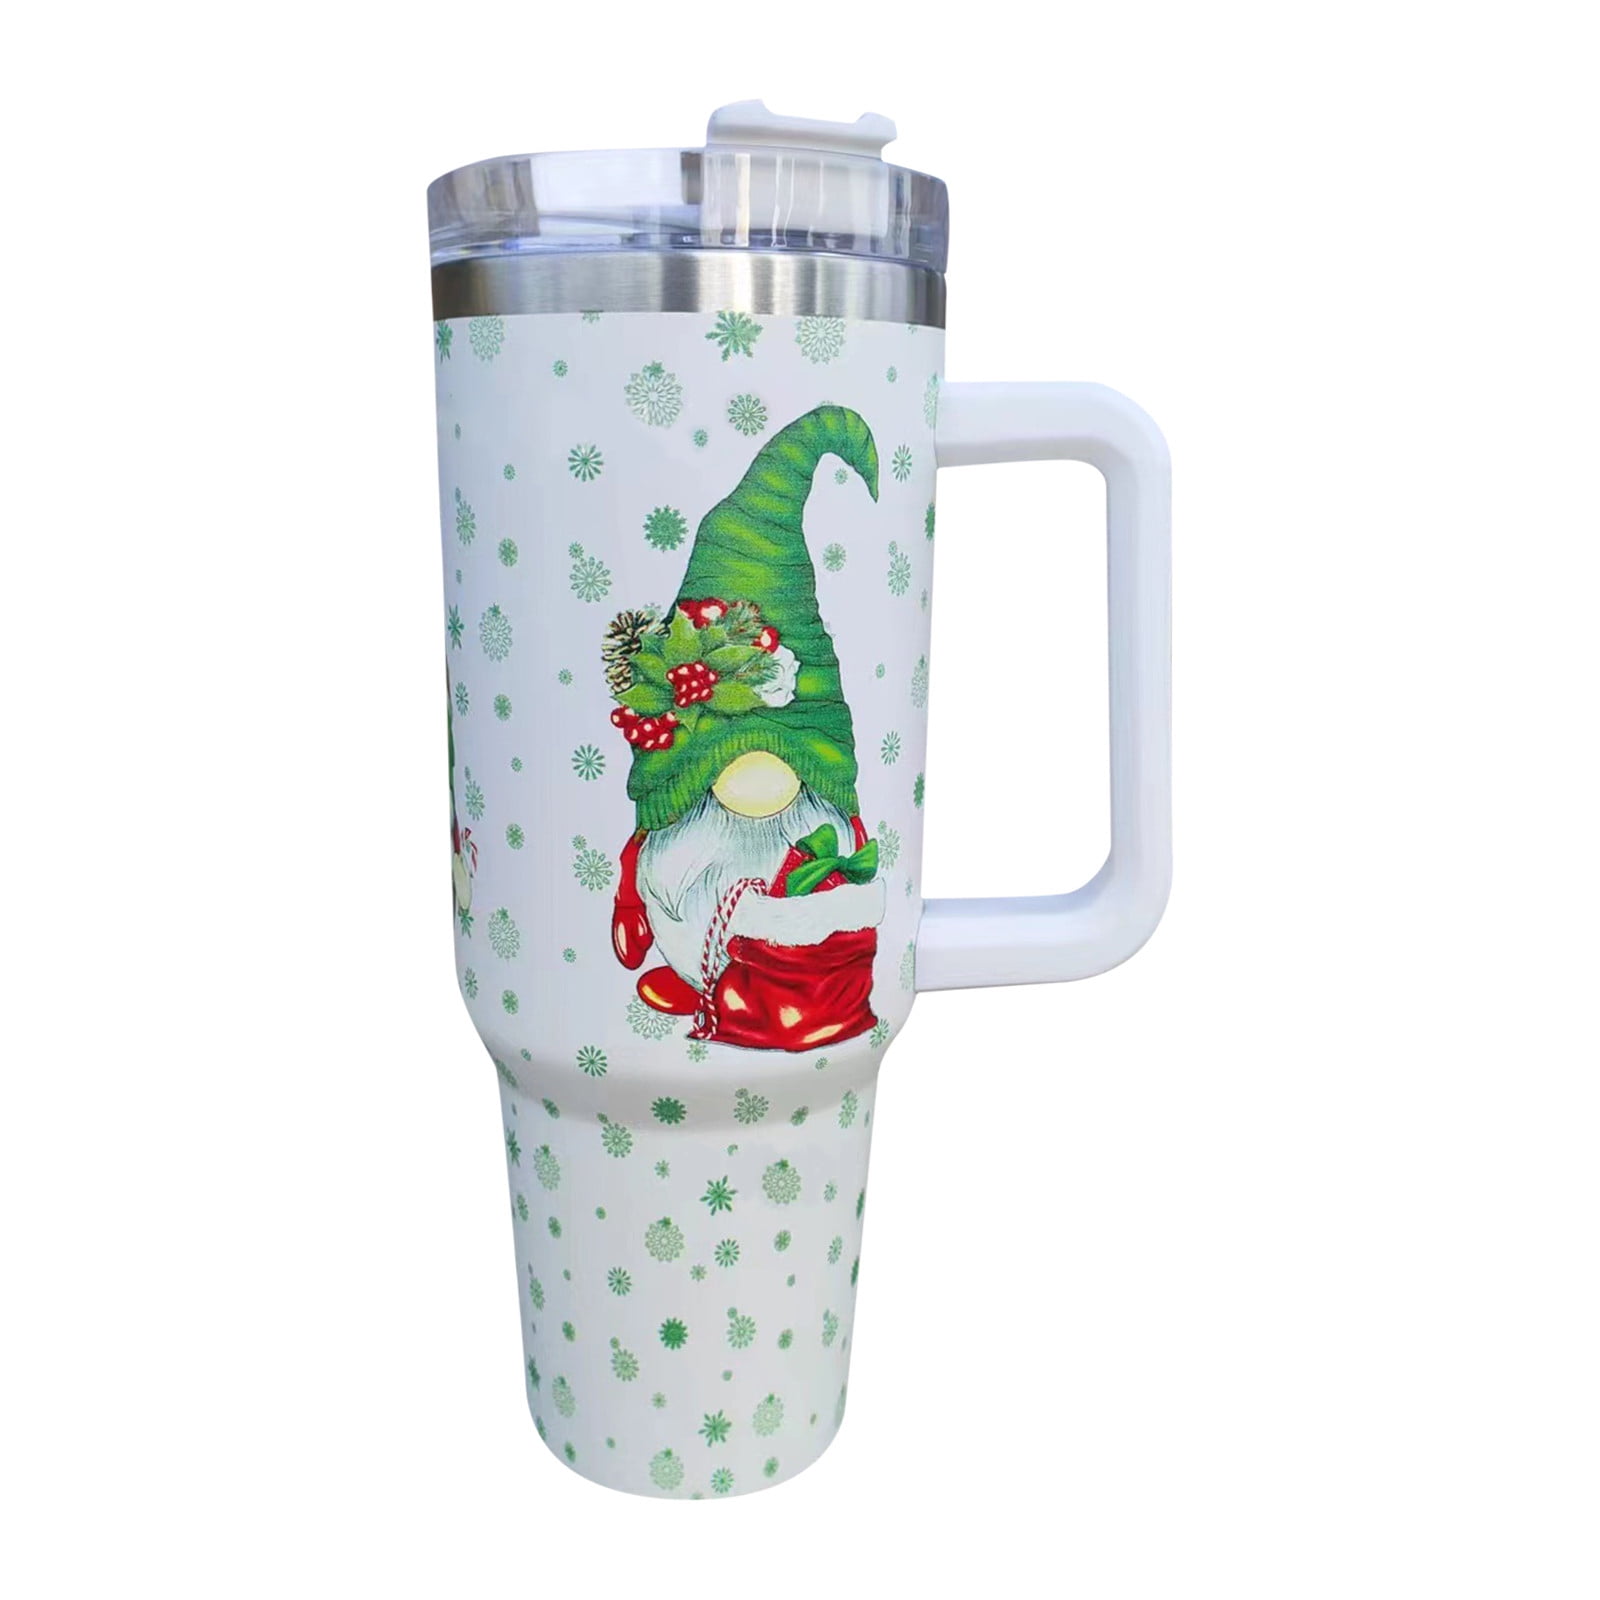 DJKDJL Grinch Christmas Tumbler 40 oz Reusable Vacuum Quencher Tumbler with  Handle, Travel Cup with Lid, Insulated Stainless Steel Cup, Coffee Mug,  Maintains Heat Cold, Heat and Ice for Hours 